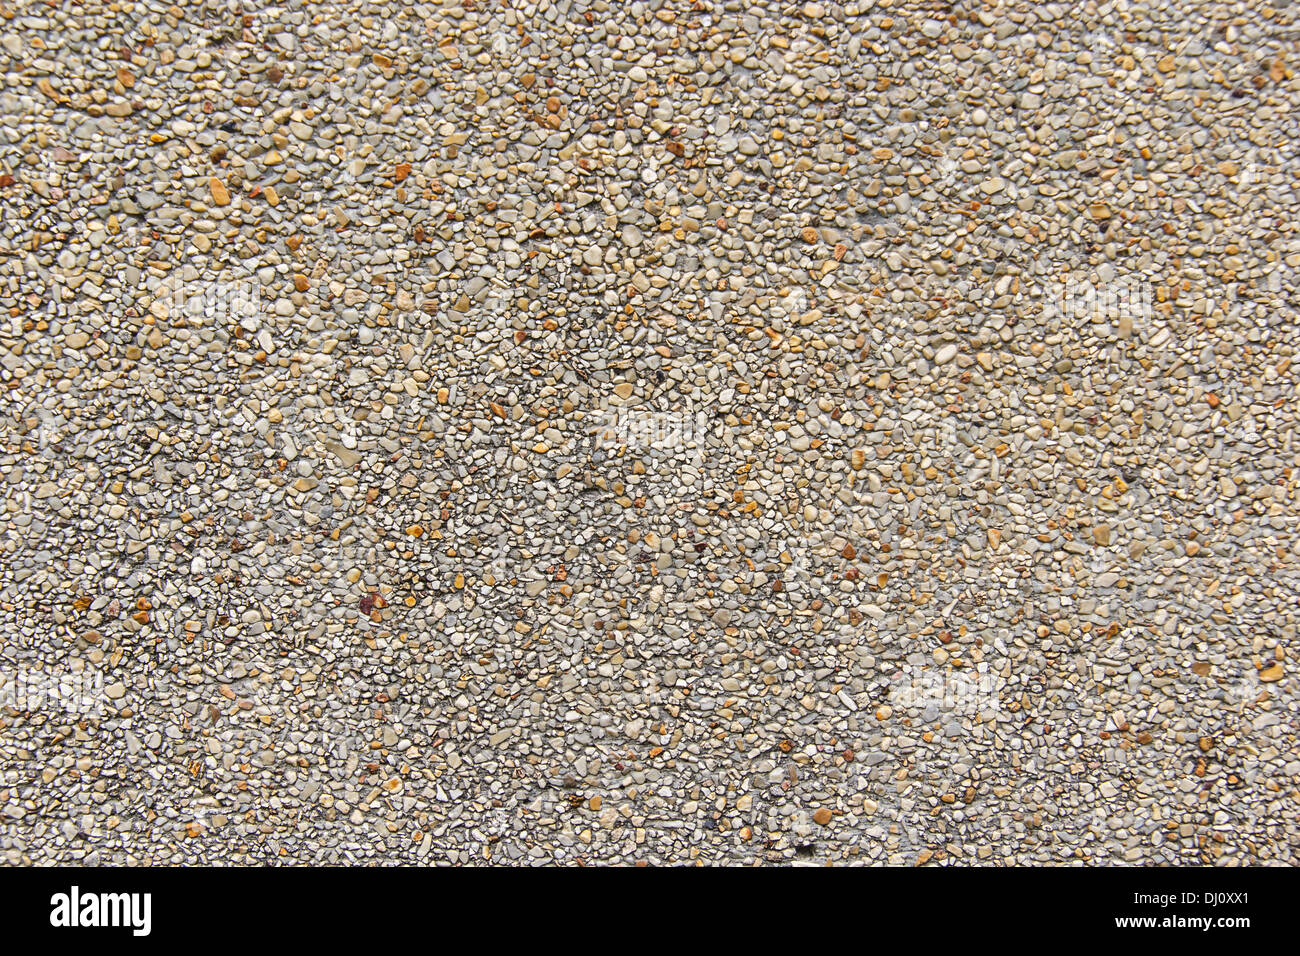 Little pebbles texture of floor, Tile stone background and texture Stock Photo